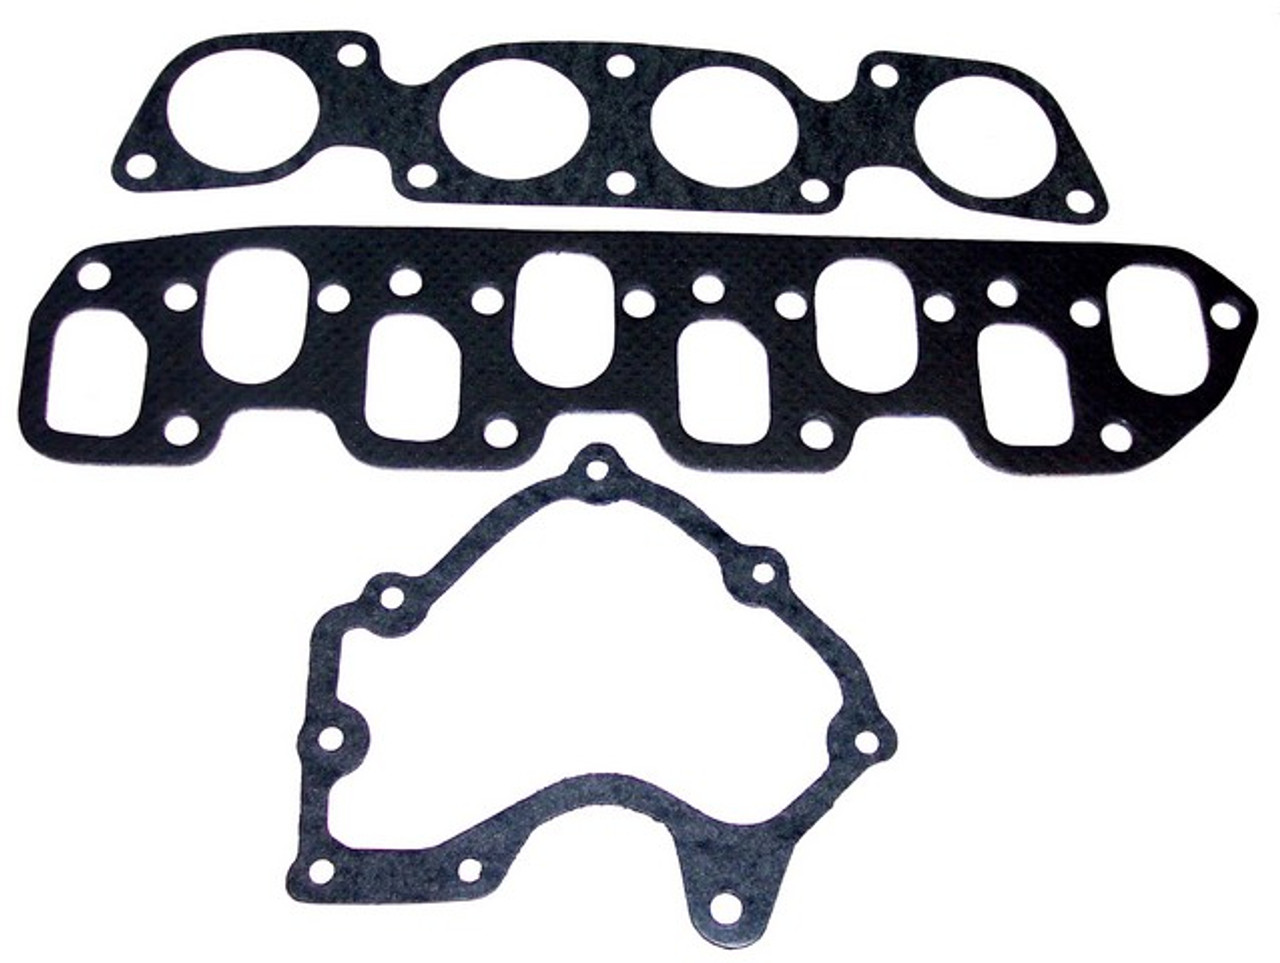 Plenum Gasket 2.5L 1987 Plymouth Caravelle - MG145.140